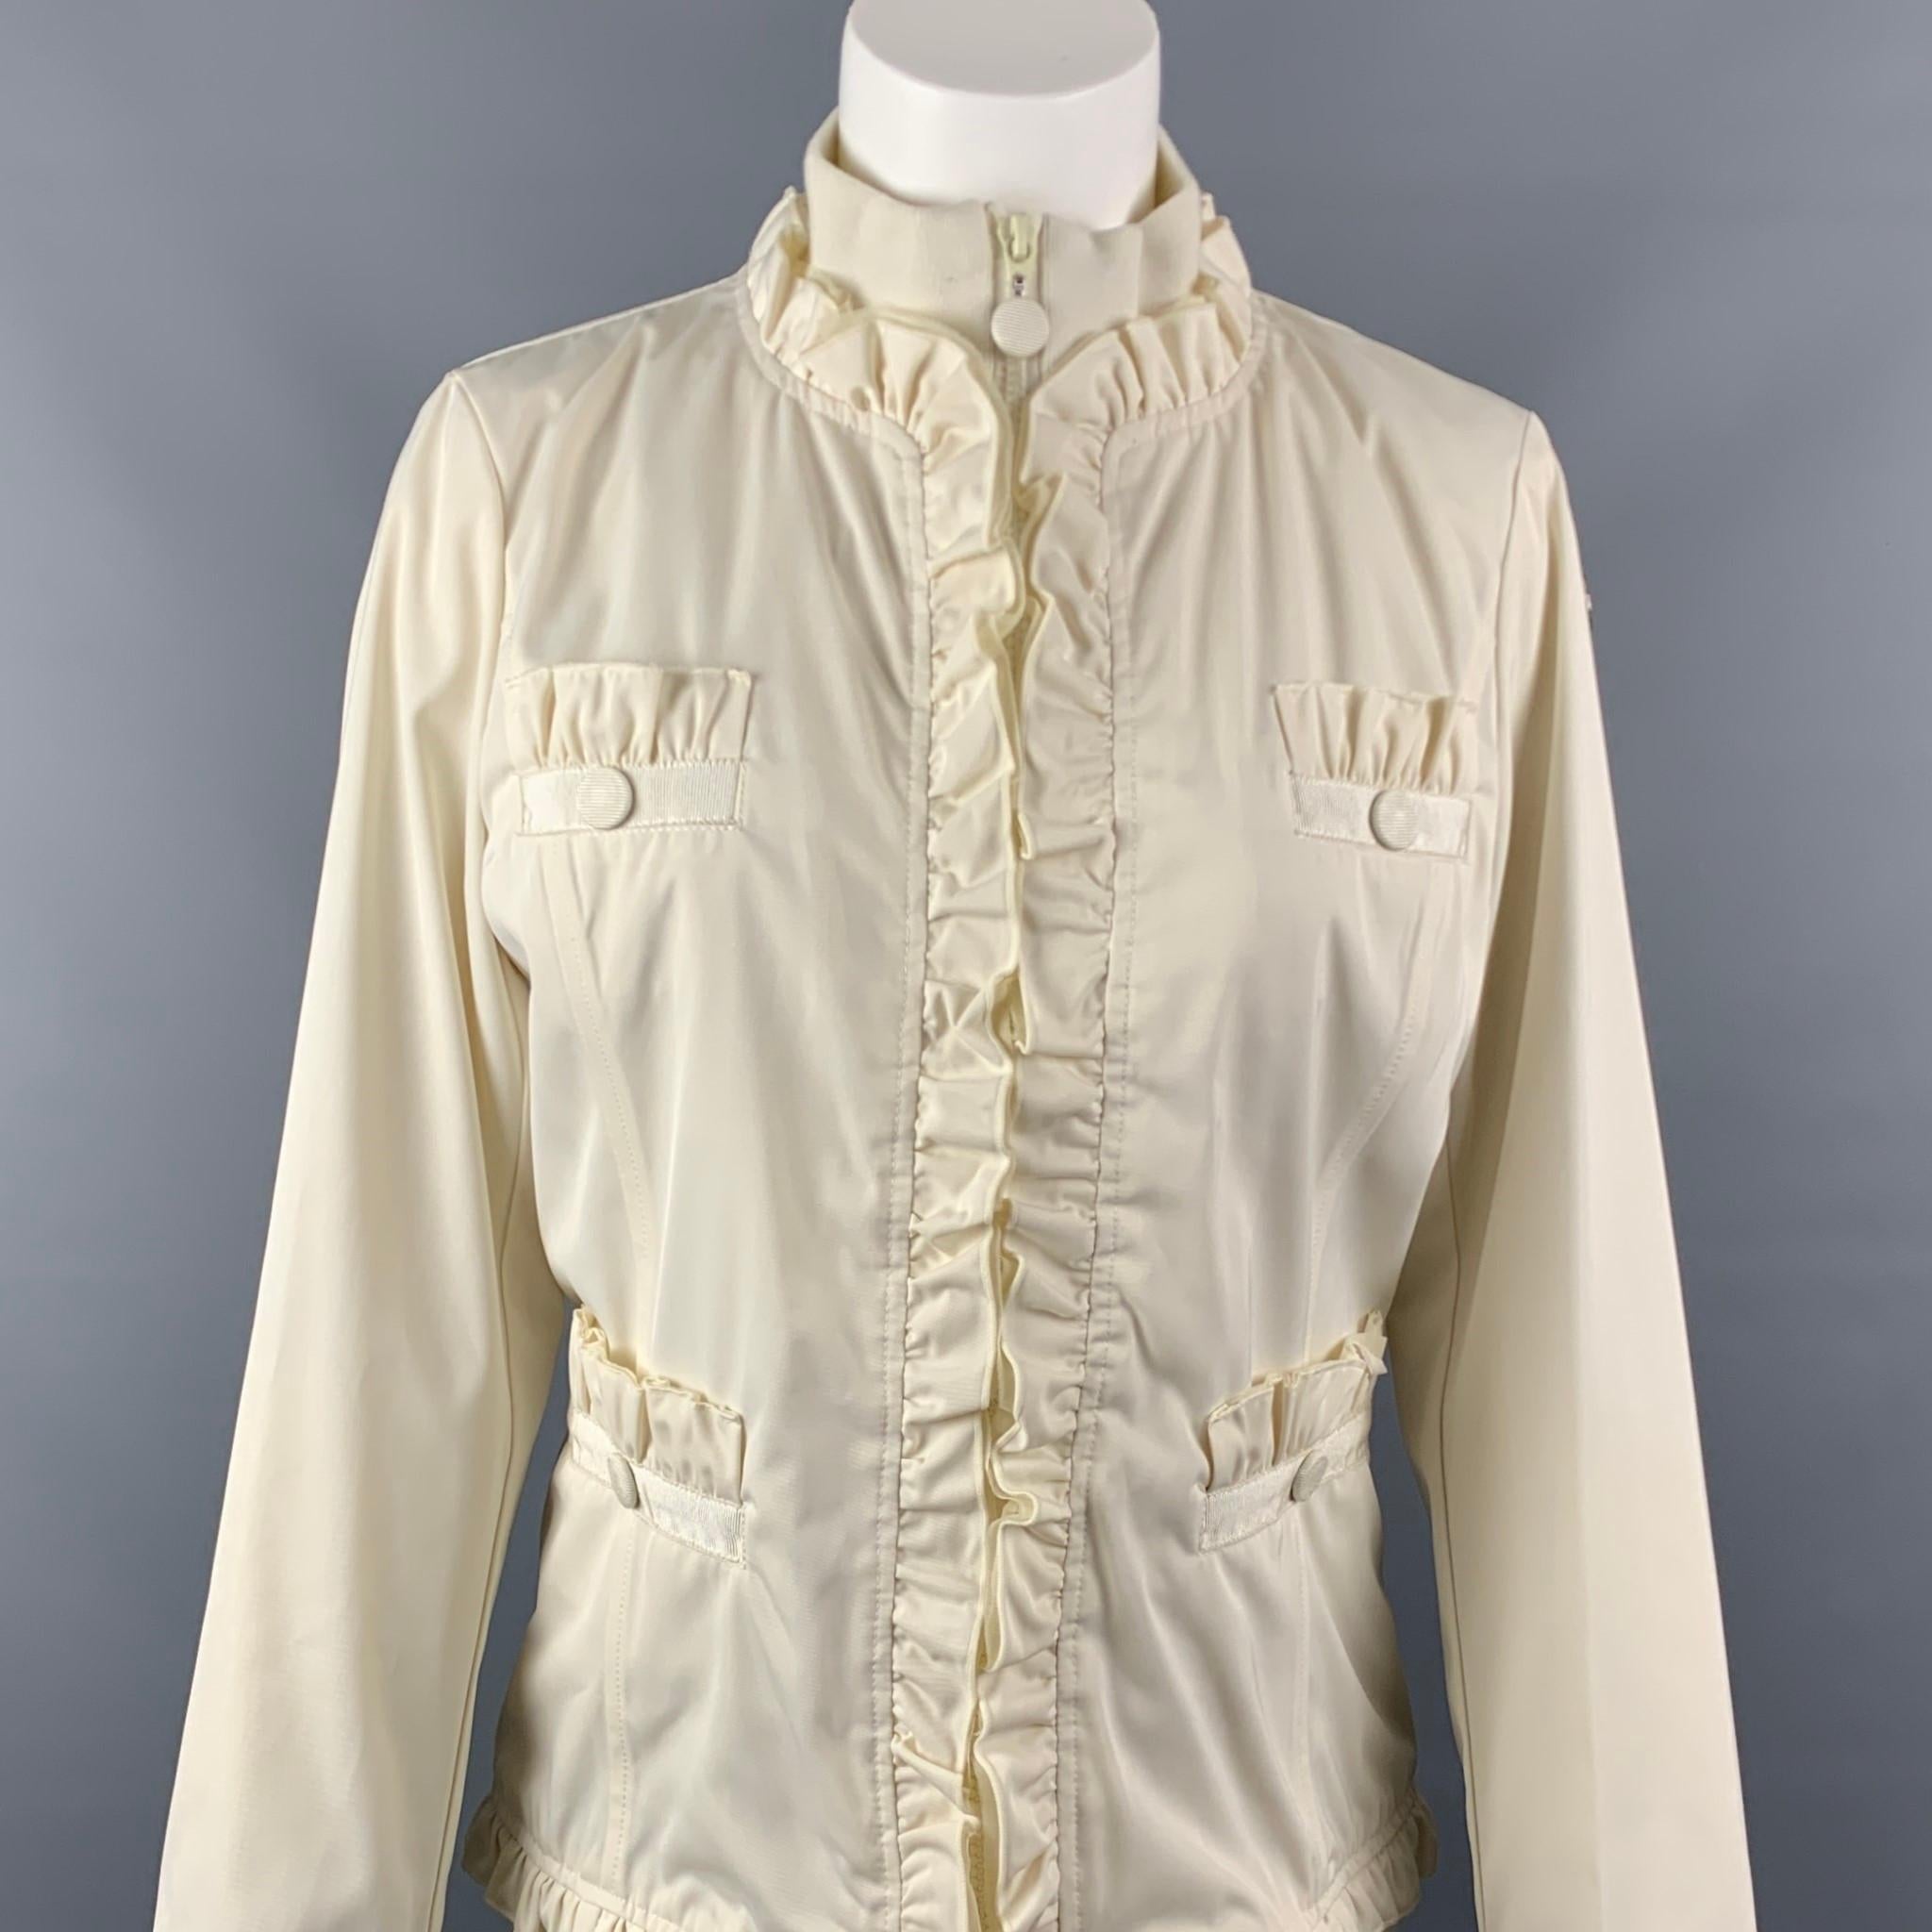 LOVE MOSCHINO jacket comes in a cream polyester with a full liner featuring a high collar, ruffled design, ribbon detail, front pockets, silver tone logo, and a full zip up closure.

Very Good Pre-Owned Condition.
Marked: D 38 / GB 10 / F 38 / USA 6